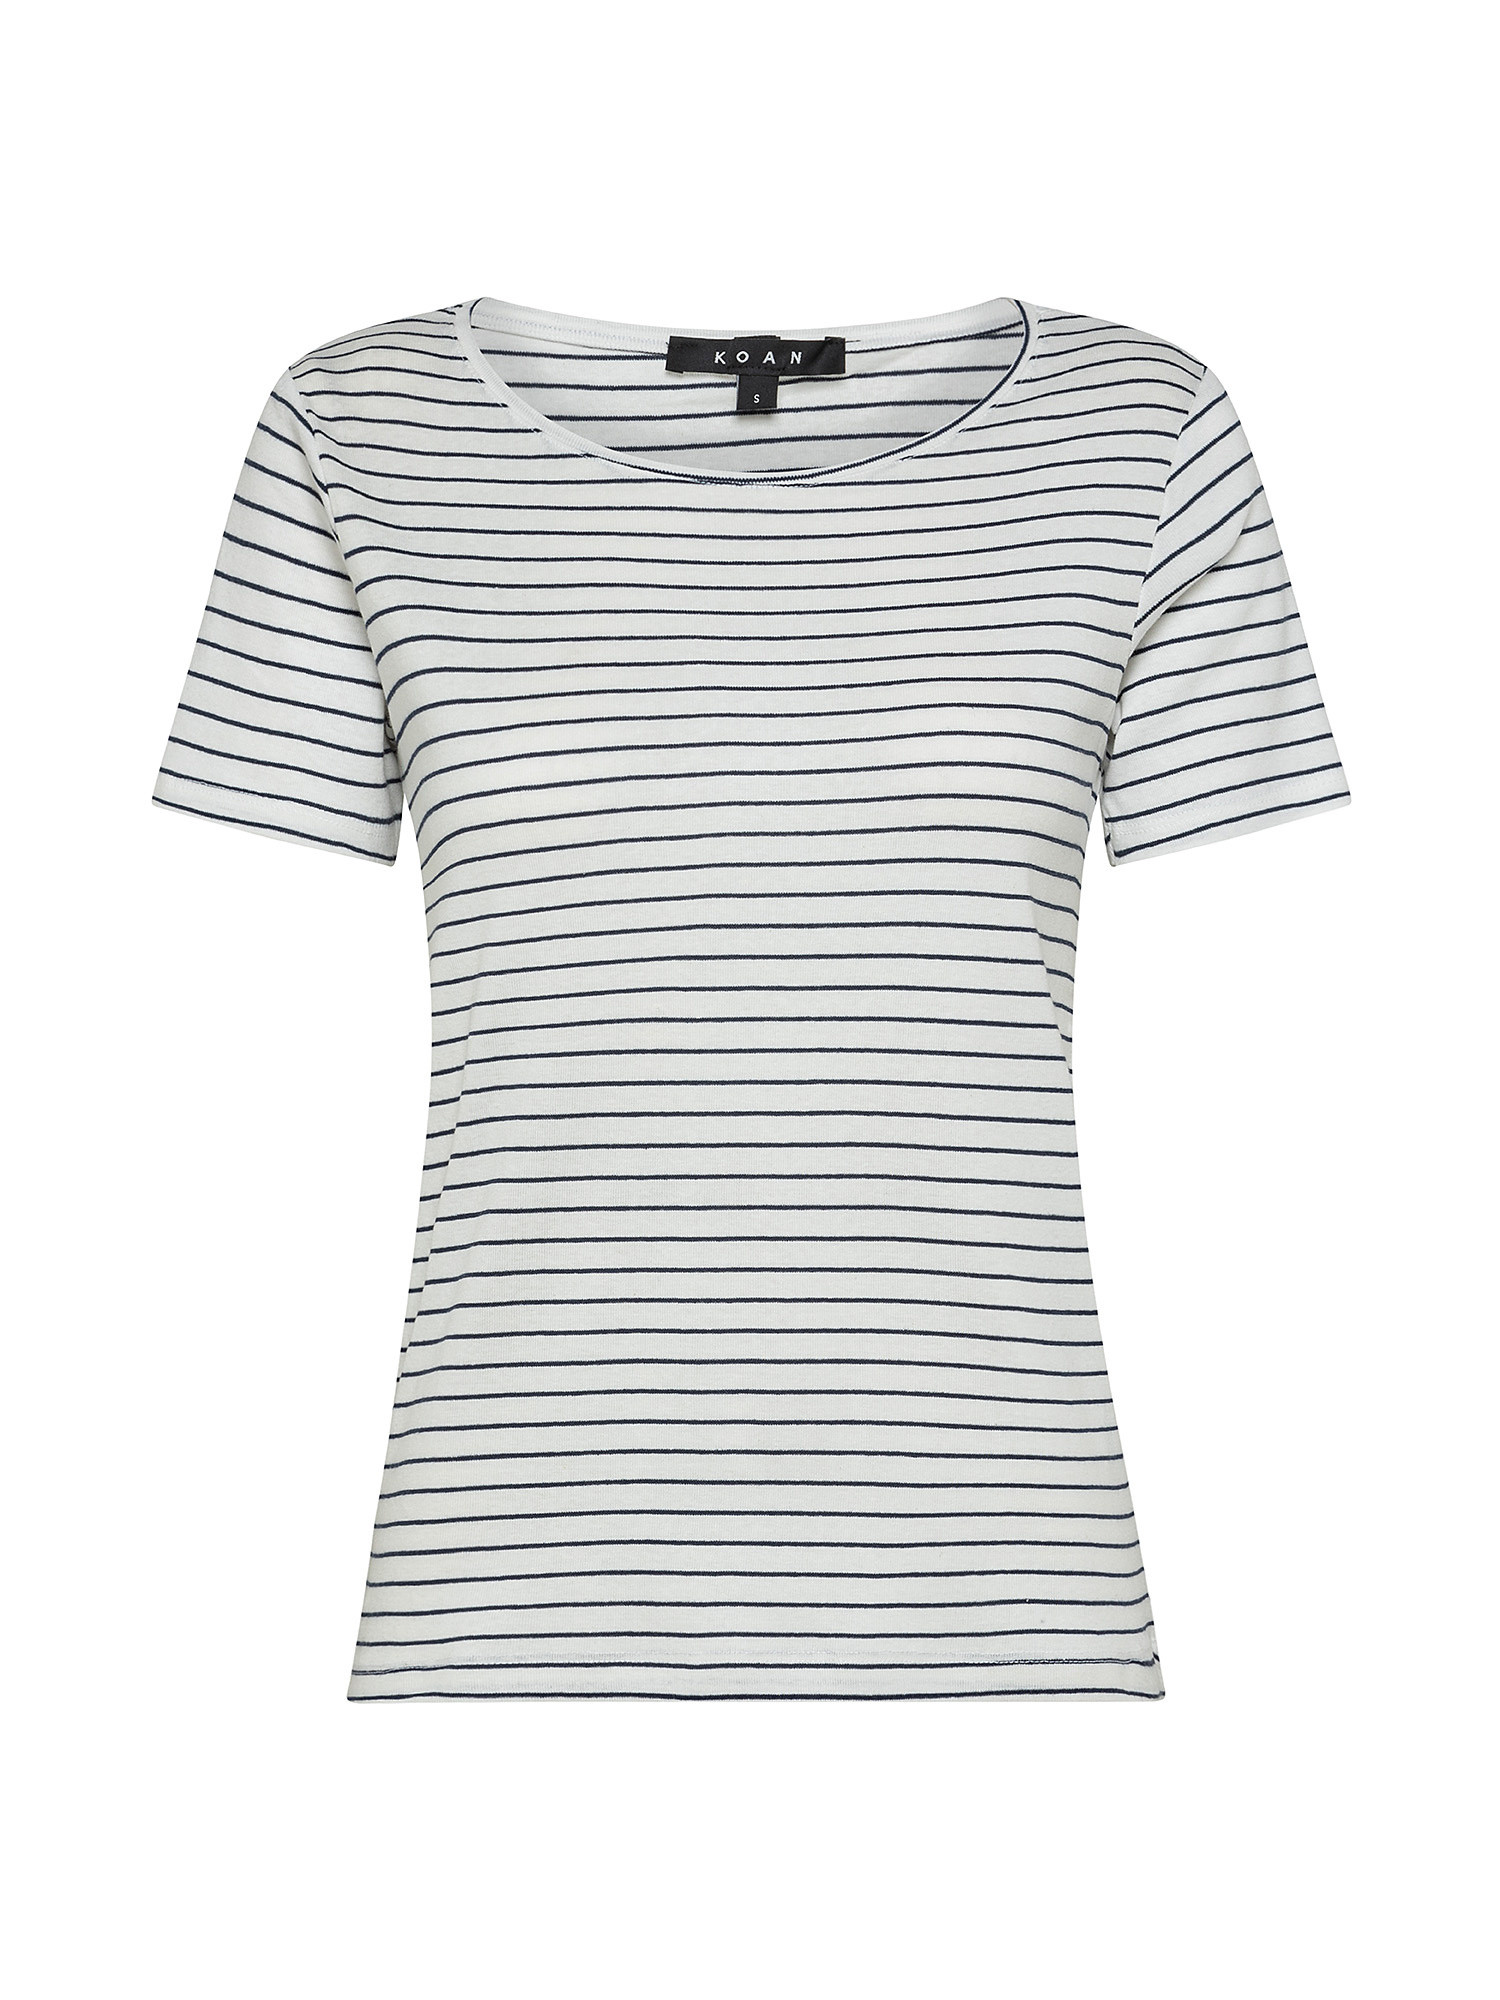 Striped T-shirt, White, large image number 0